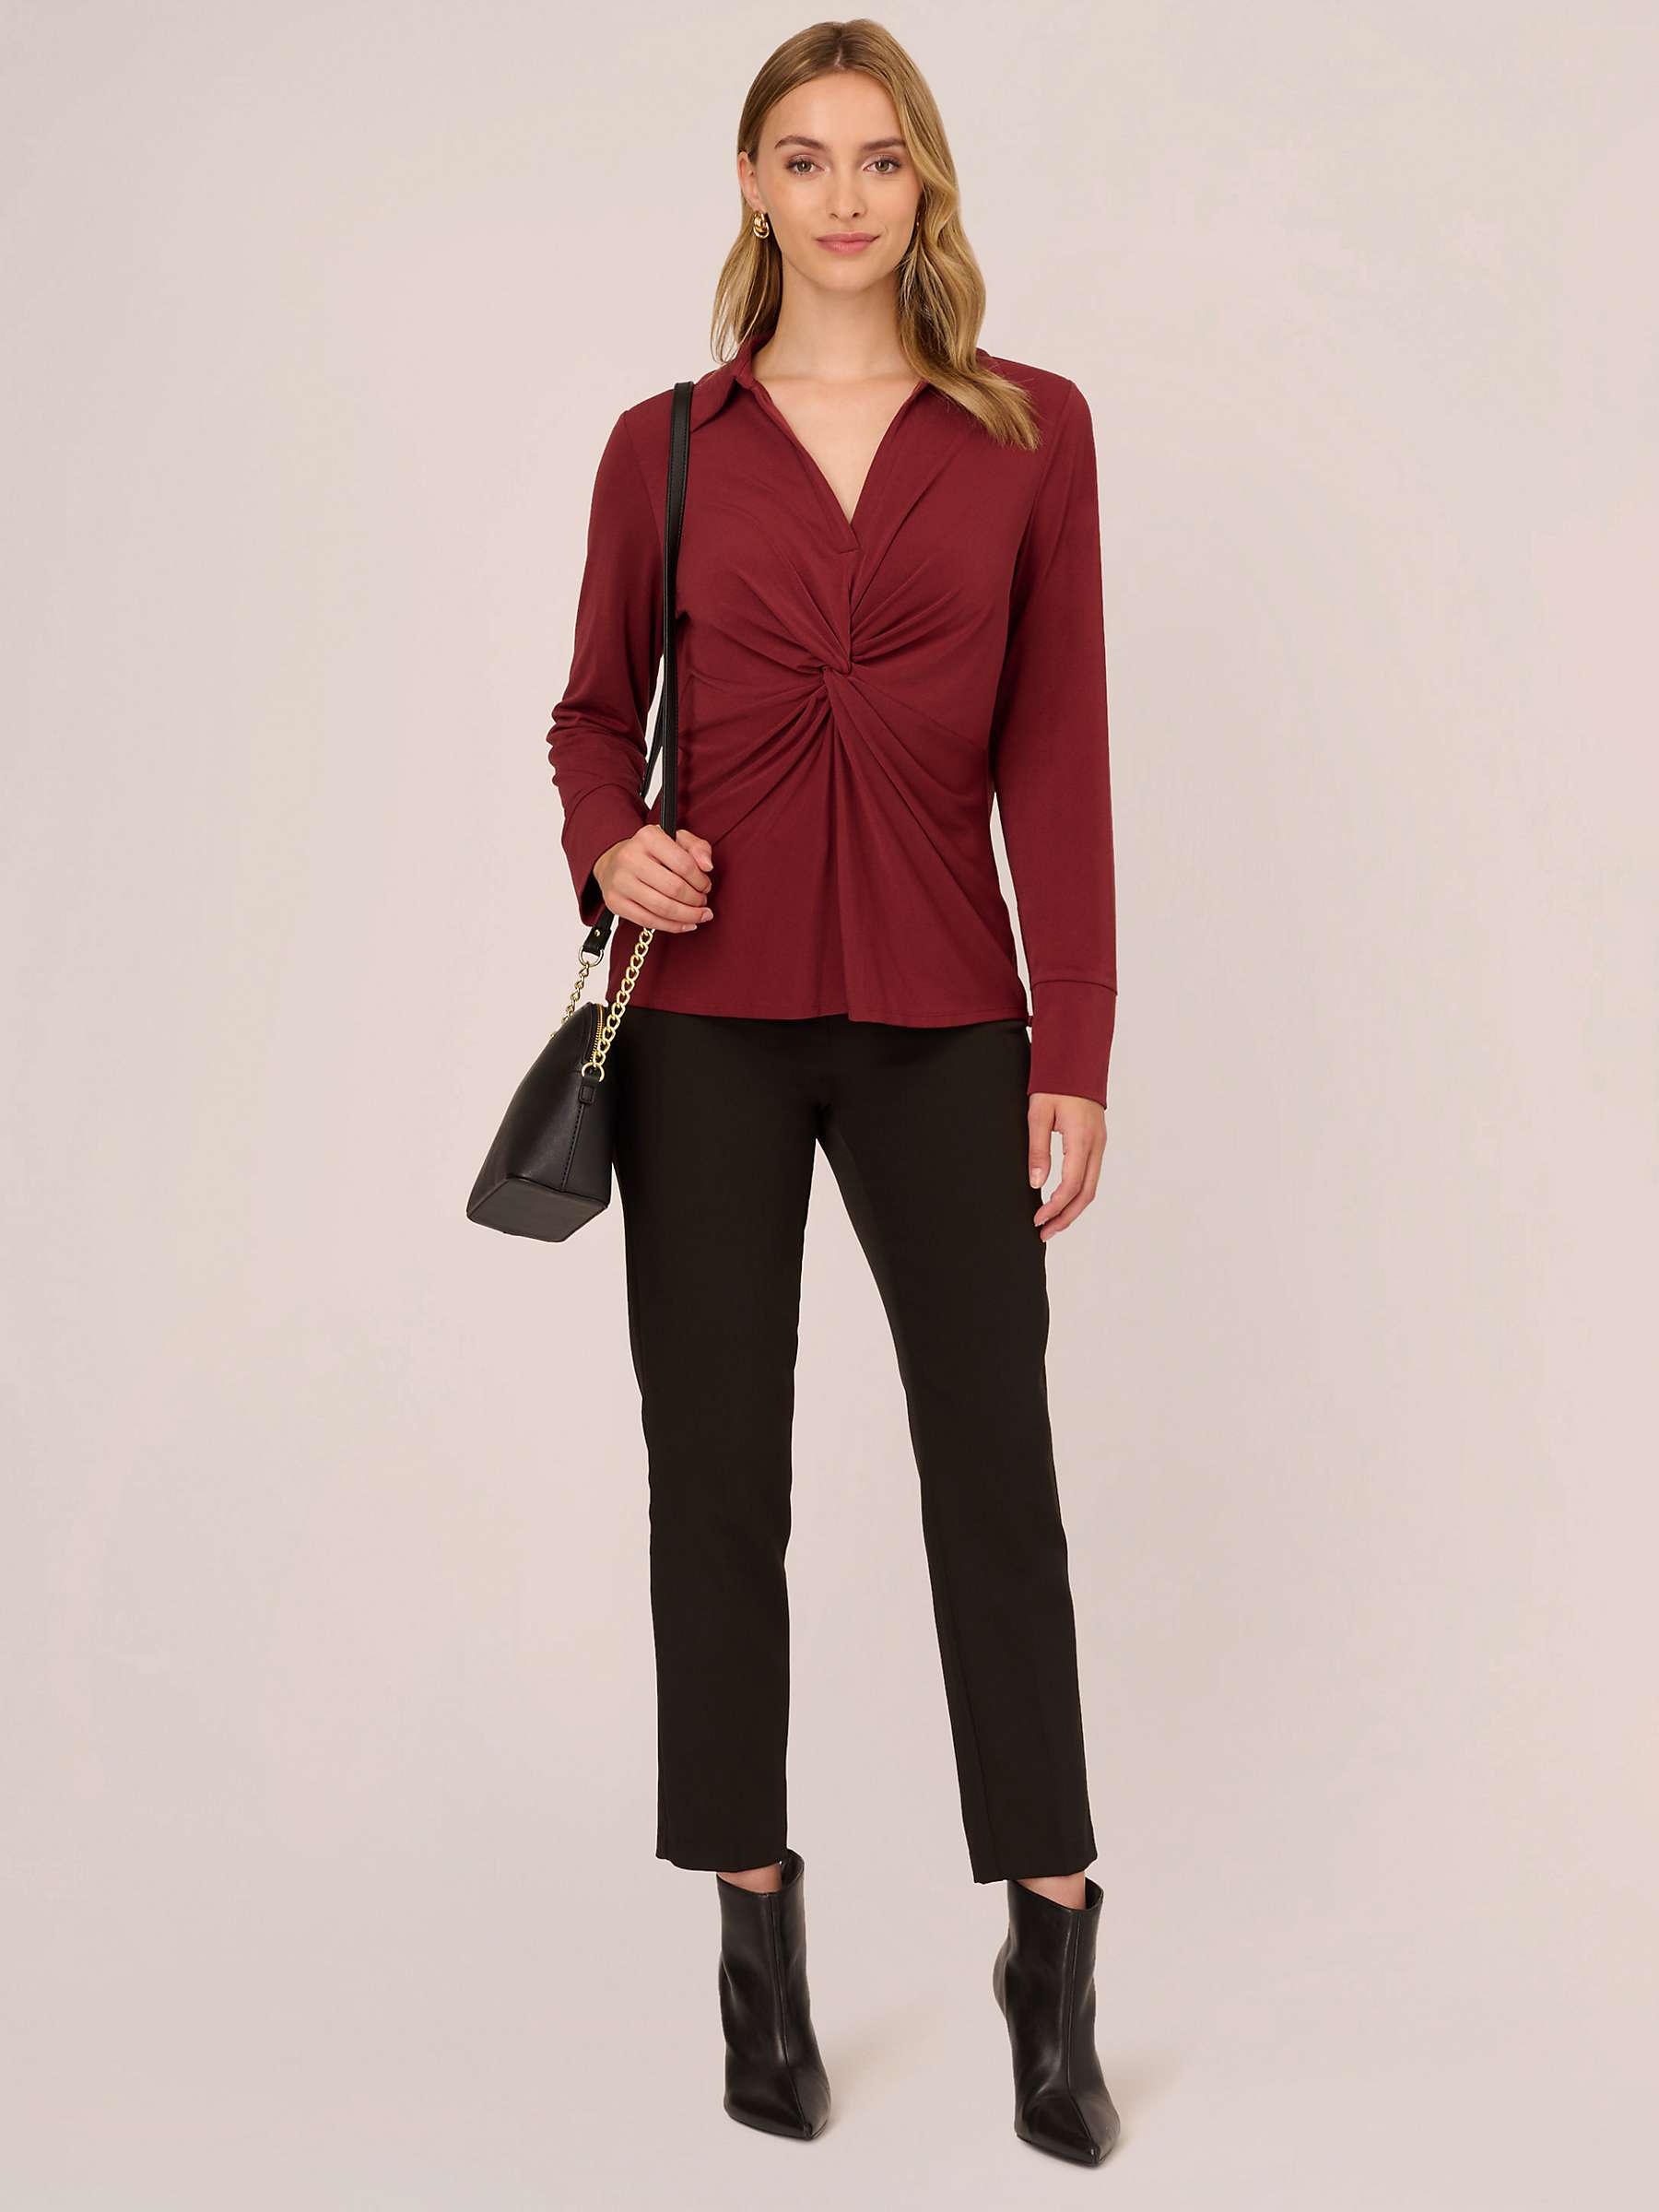 Buy Adrianna Papell Twist Front Long Sleeve Top Online at johnlewis.com